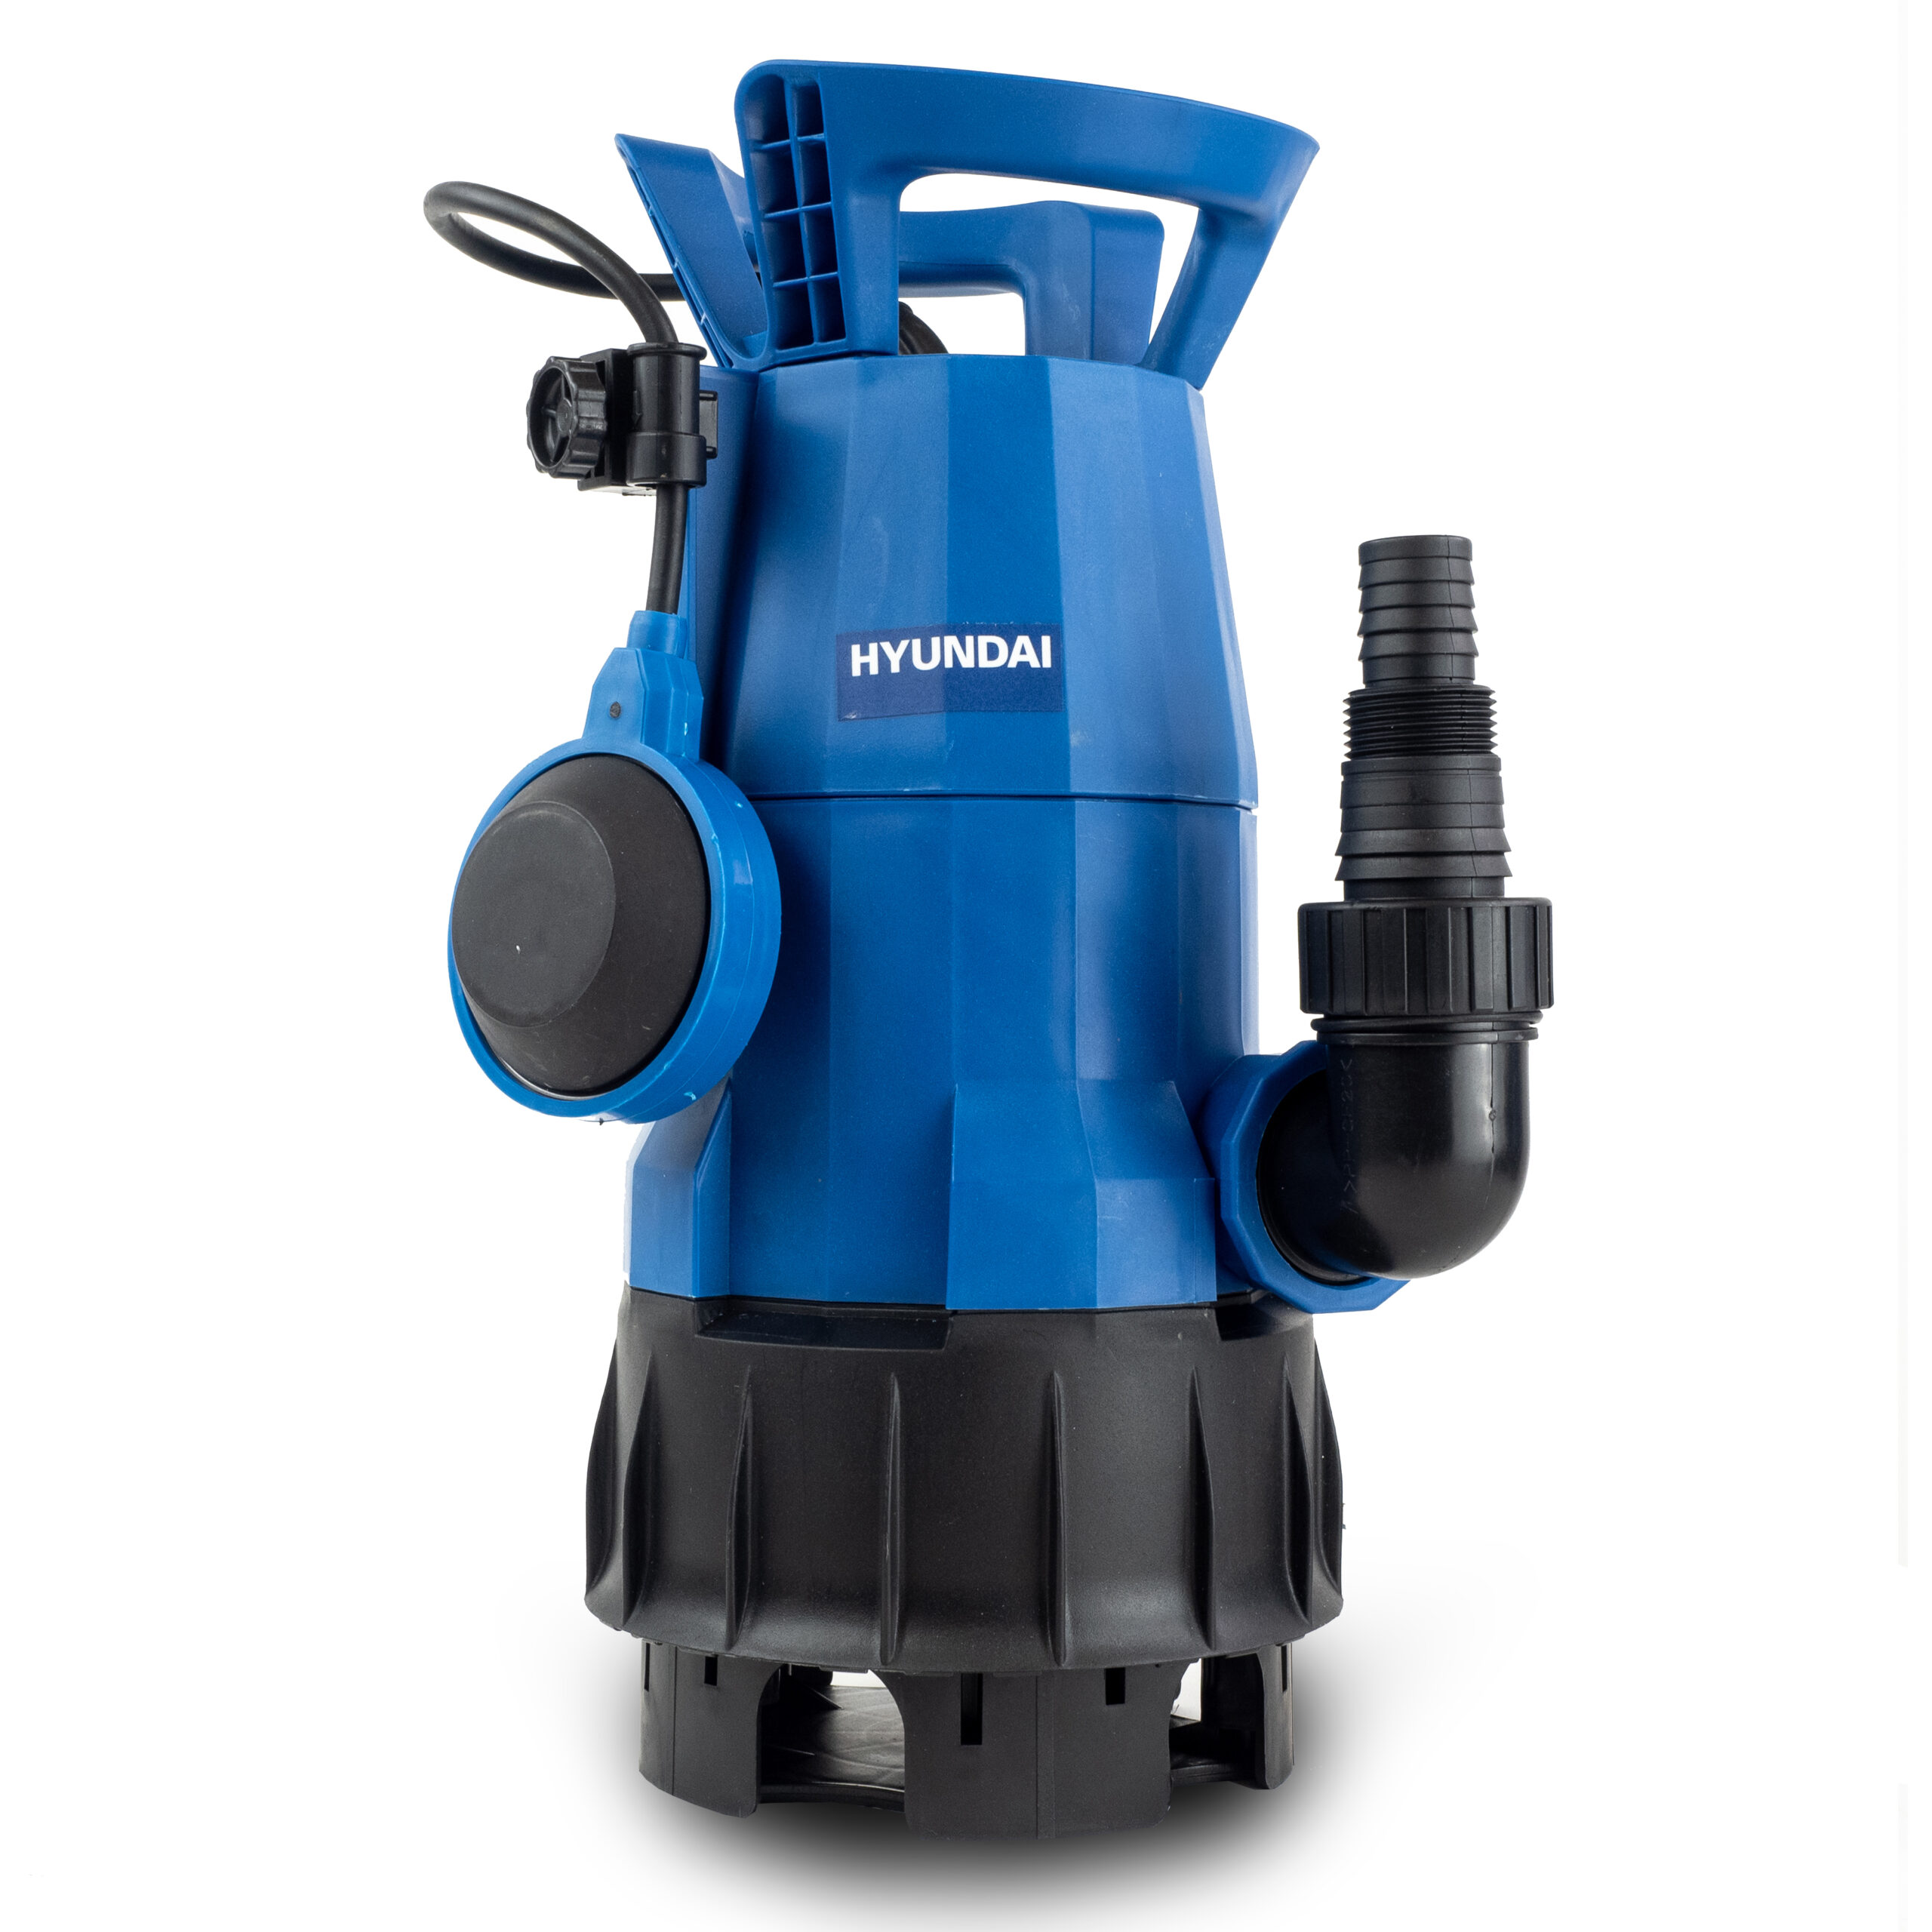 UK Suppliers Hyundai 550W Electric Clean and Dirty Water Submersible Water Pump / Sub Pump 